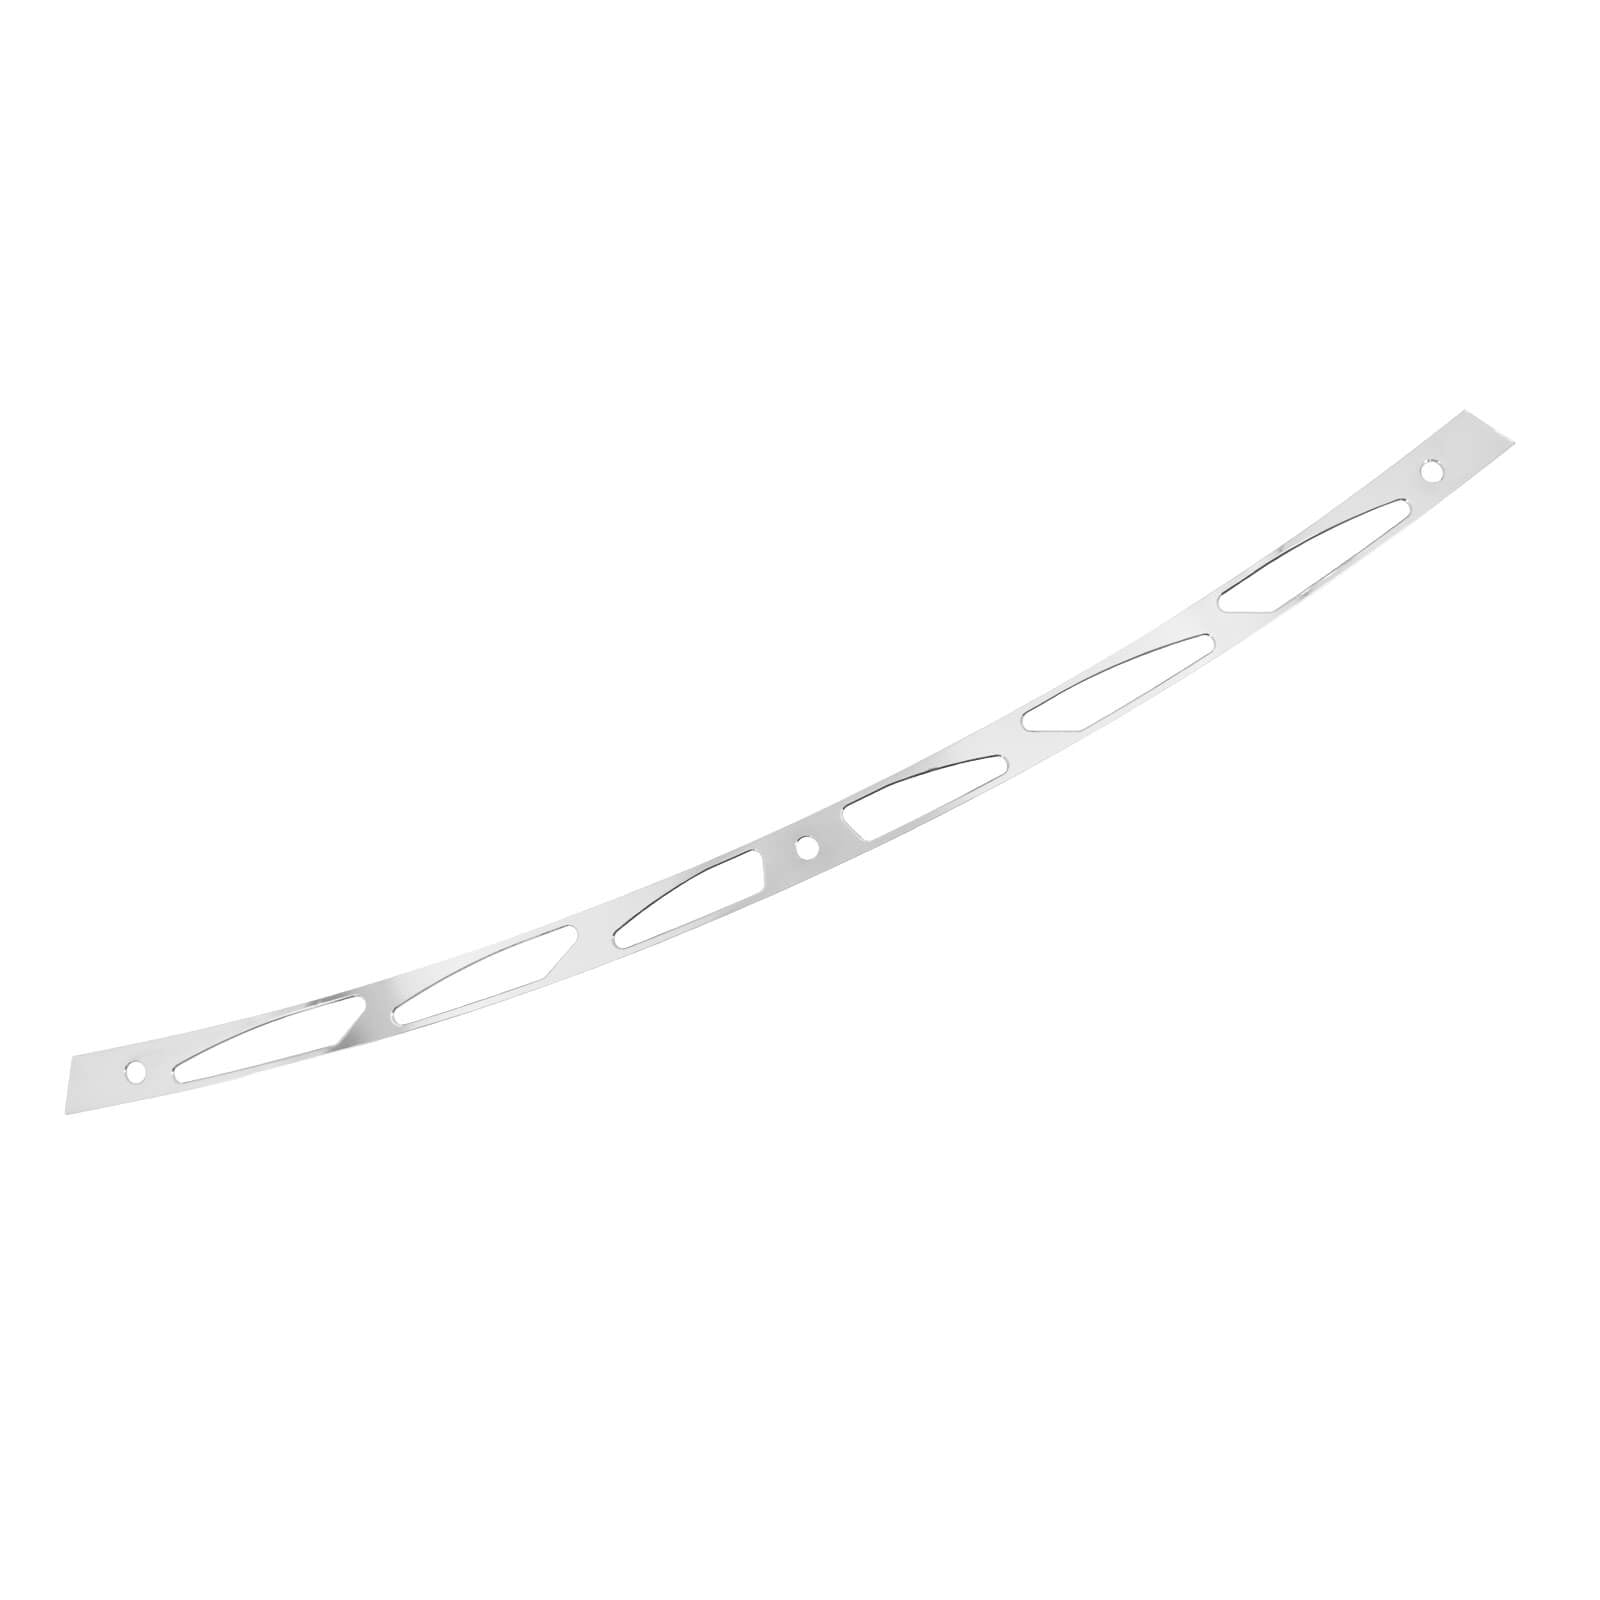 WI001104-mactions-harley-motorcycle-hollow-windshield-trim-chrome